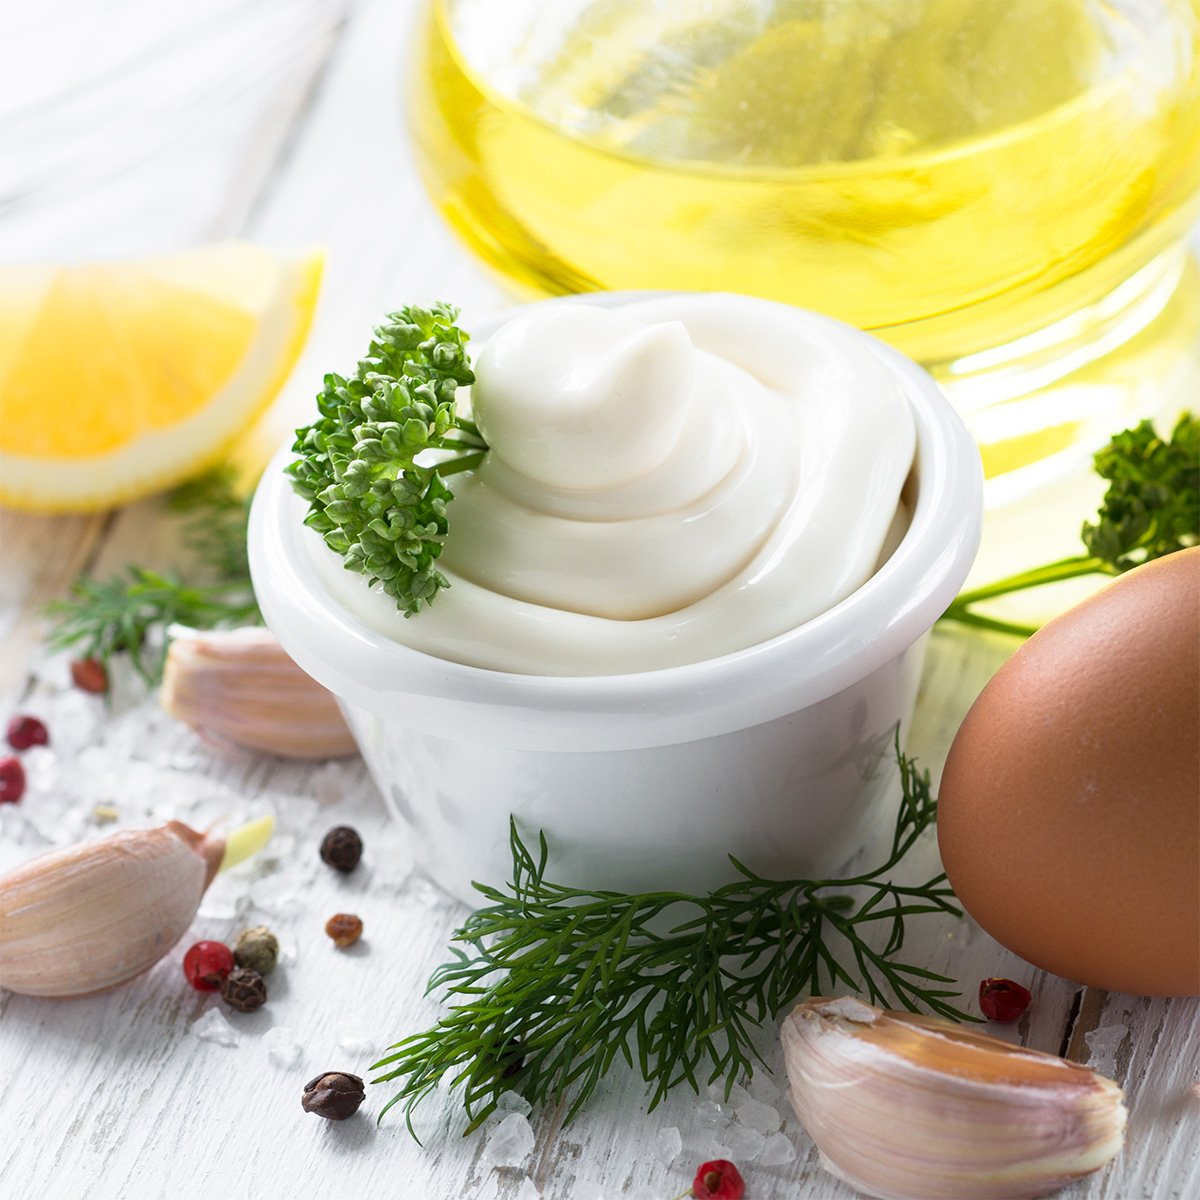 homemade mayonnaise and its ingredients